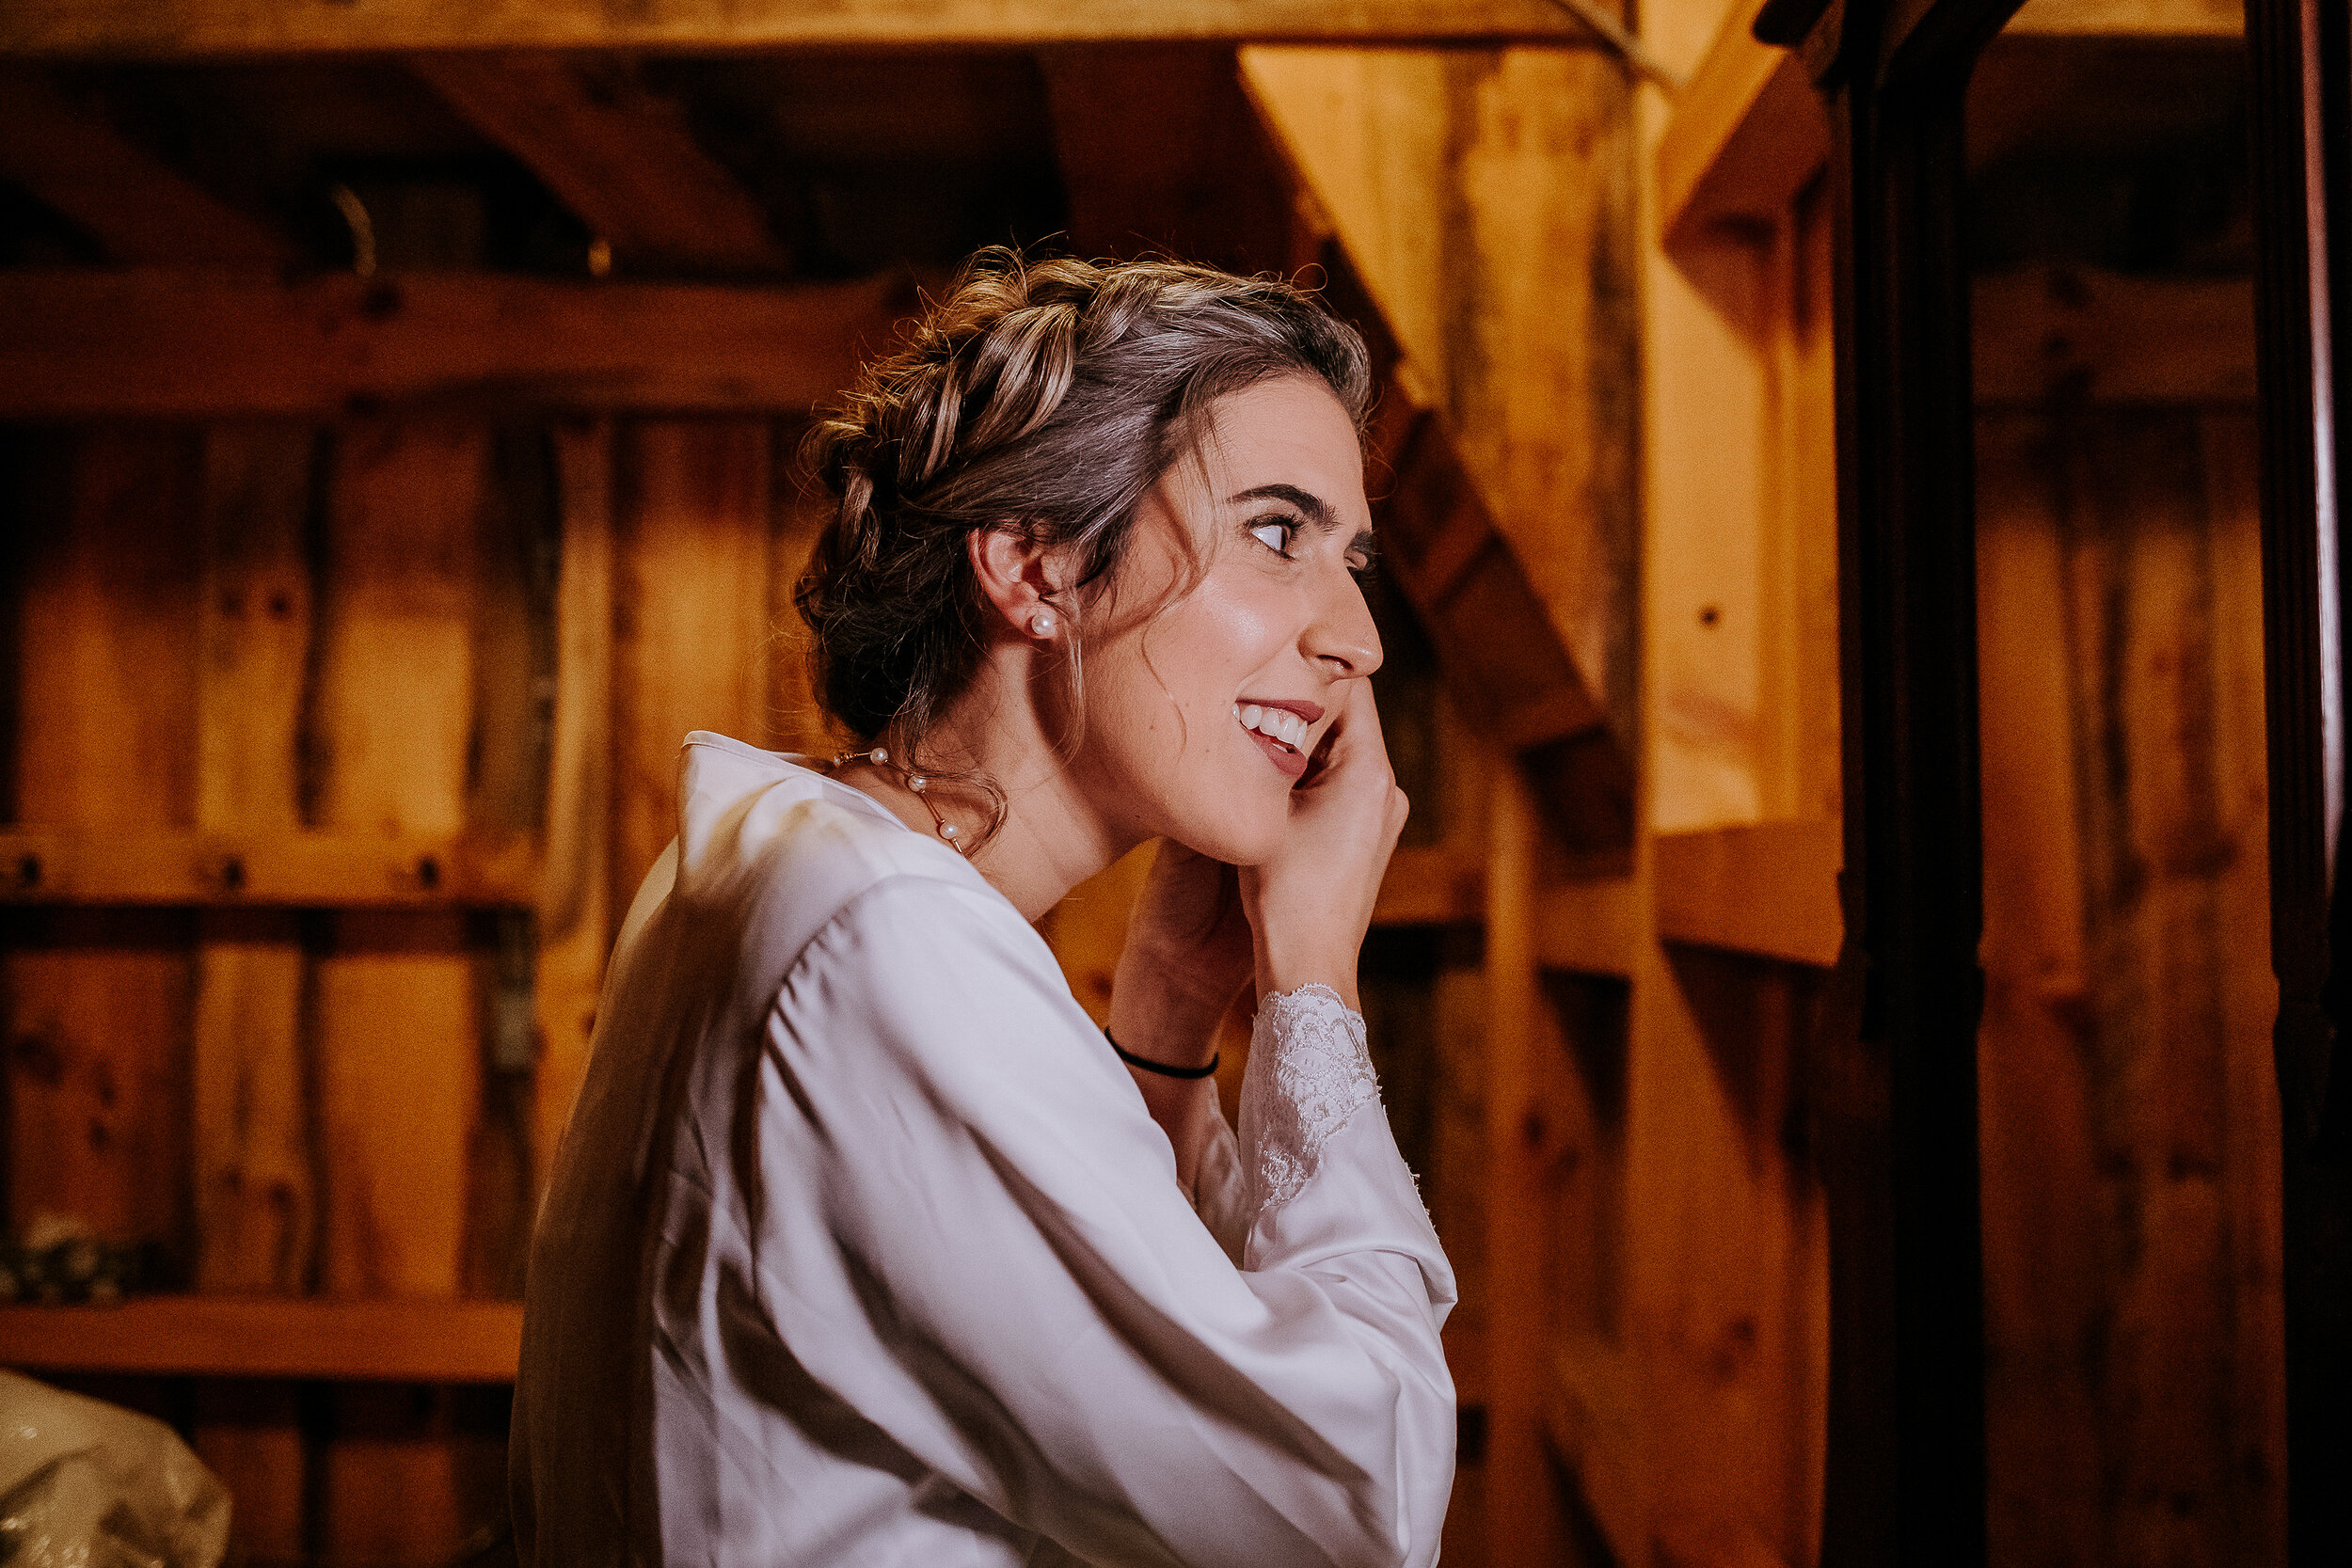  Candidly happy moments of a beautiful bohemian styled bride on her wedding morning captured by Kindred + Co. Photography in Akron, Ohio. bohemian bride, bohemian braided wedding updo, wedding day makeup, silk wedding morning robe, pearl wedding neck